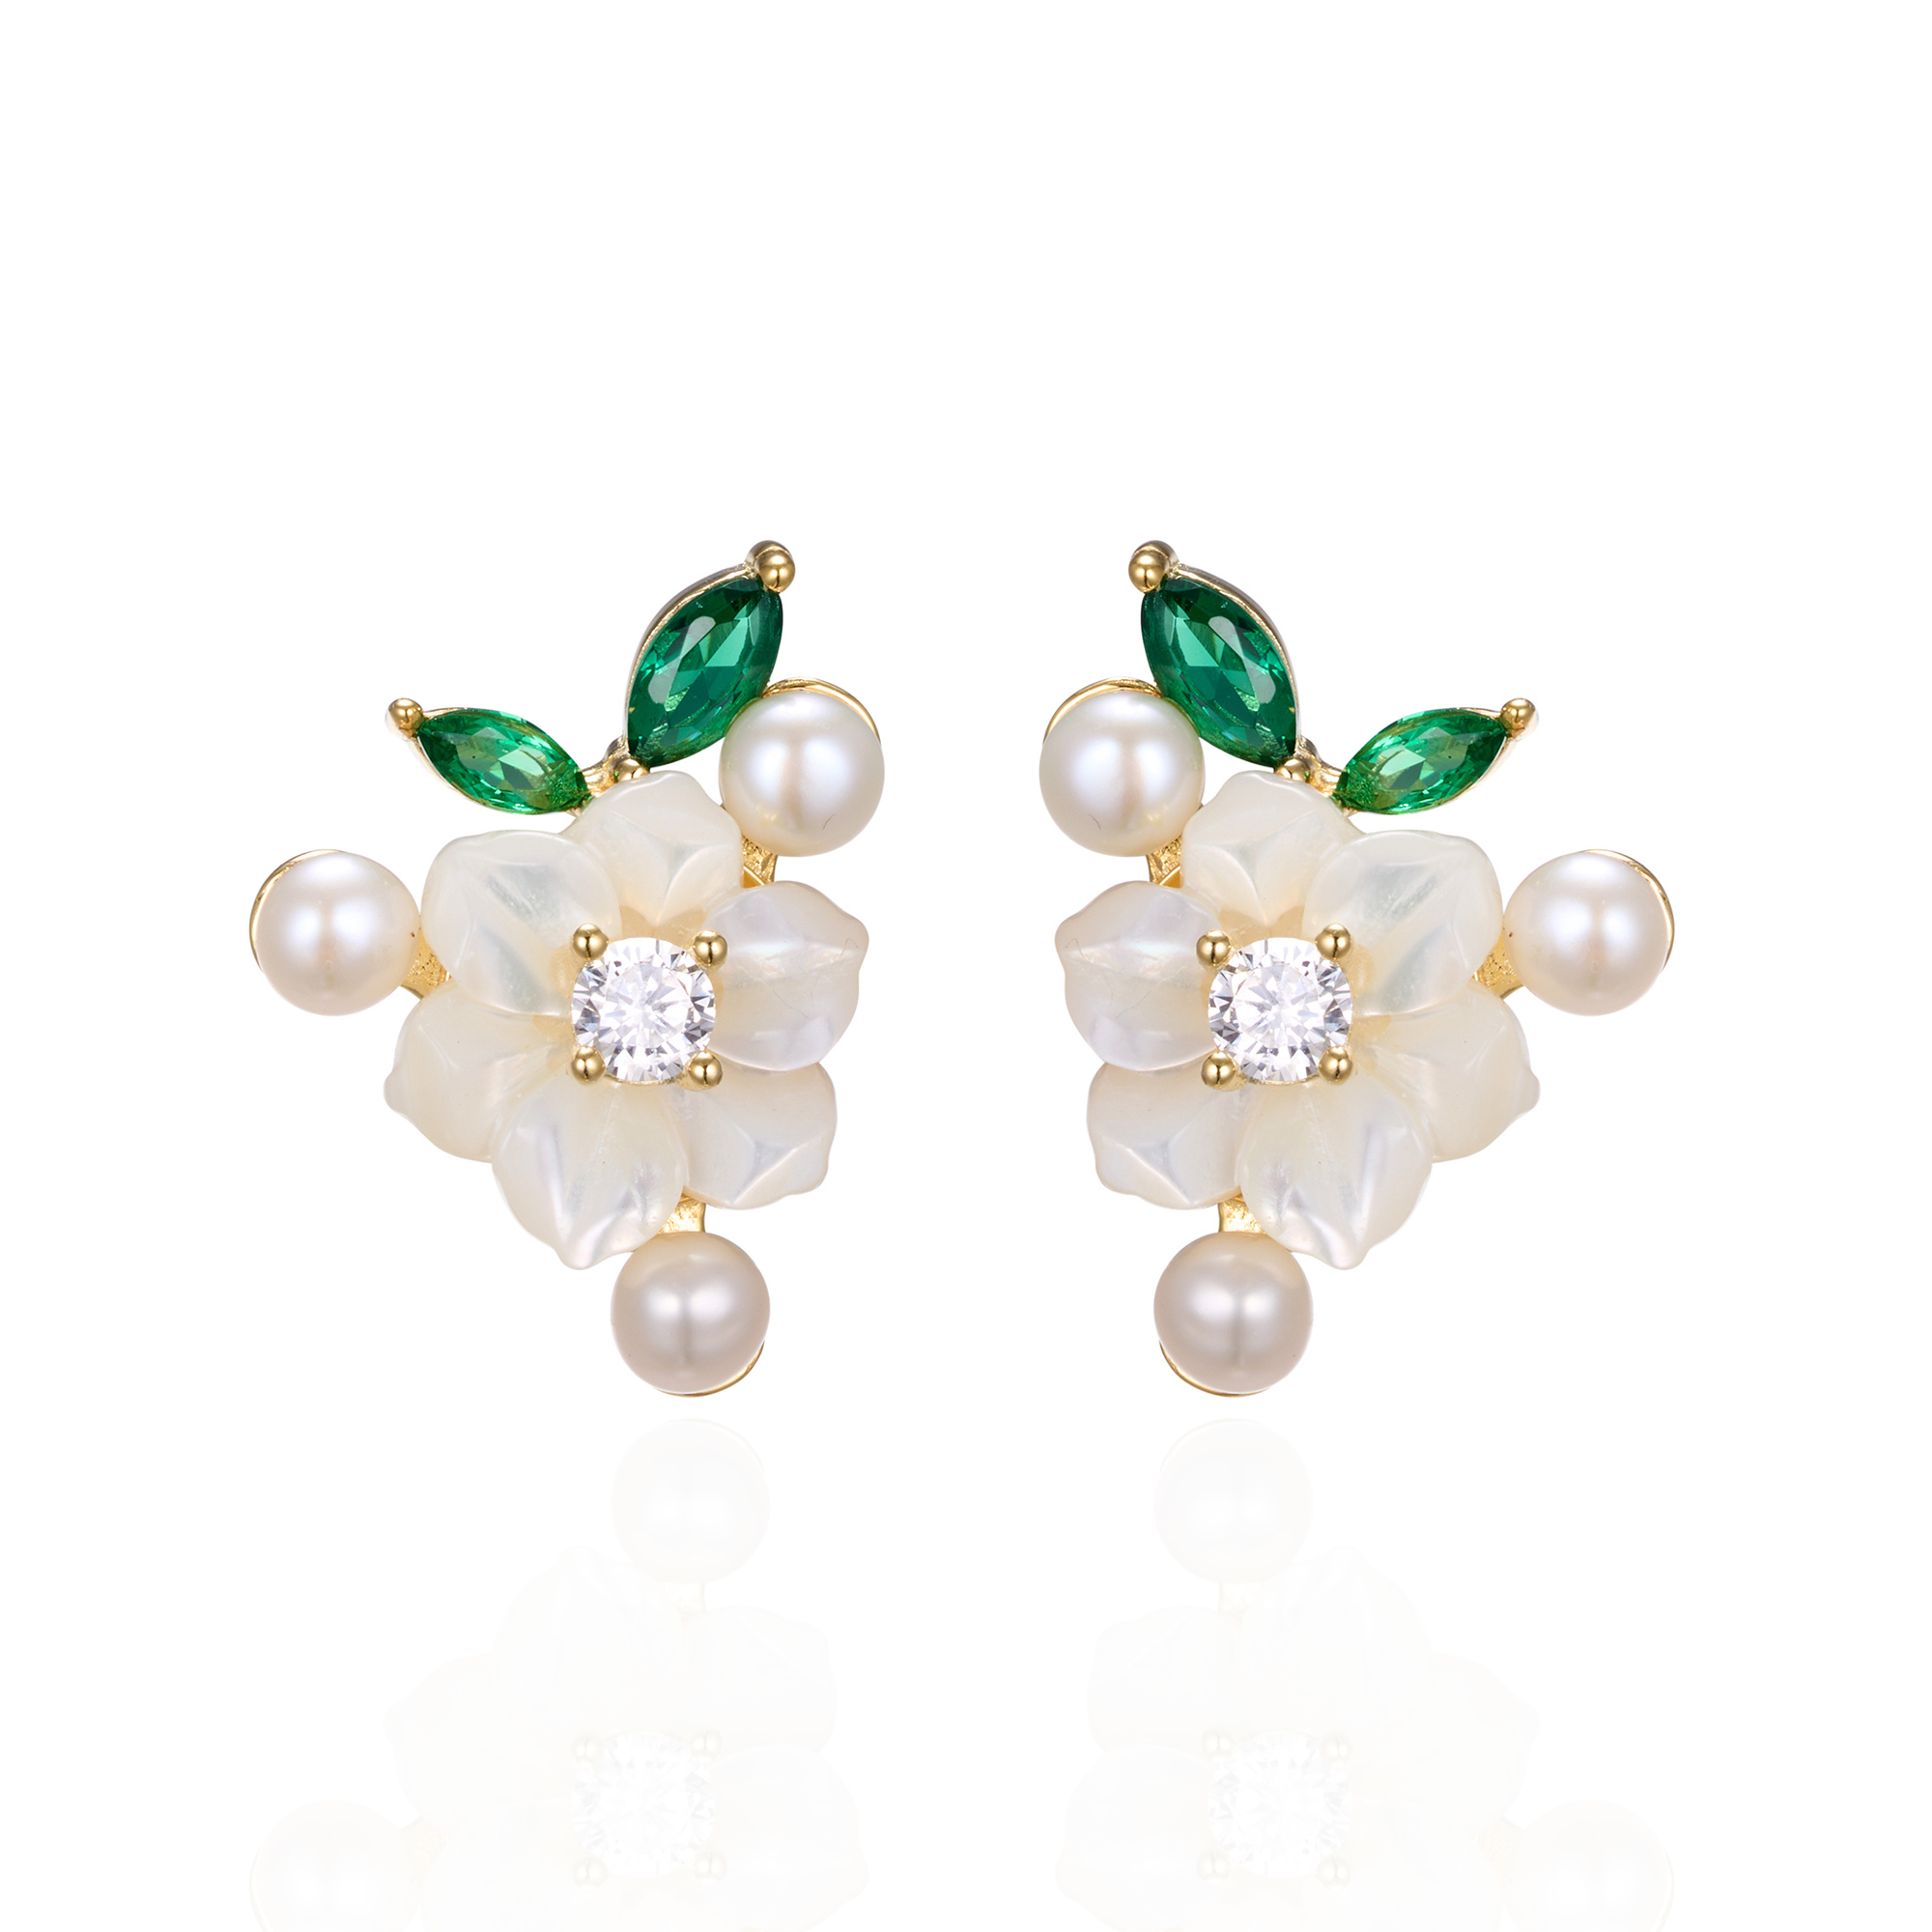 A pair of silver gold plated earrings with green stones, pearls and shell flowers.